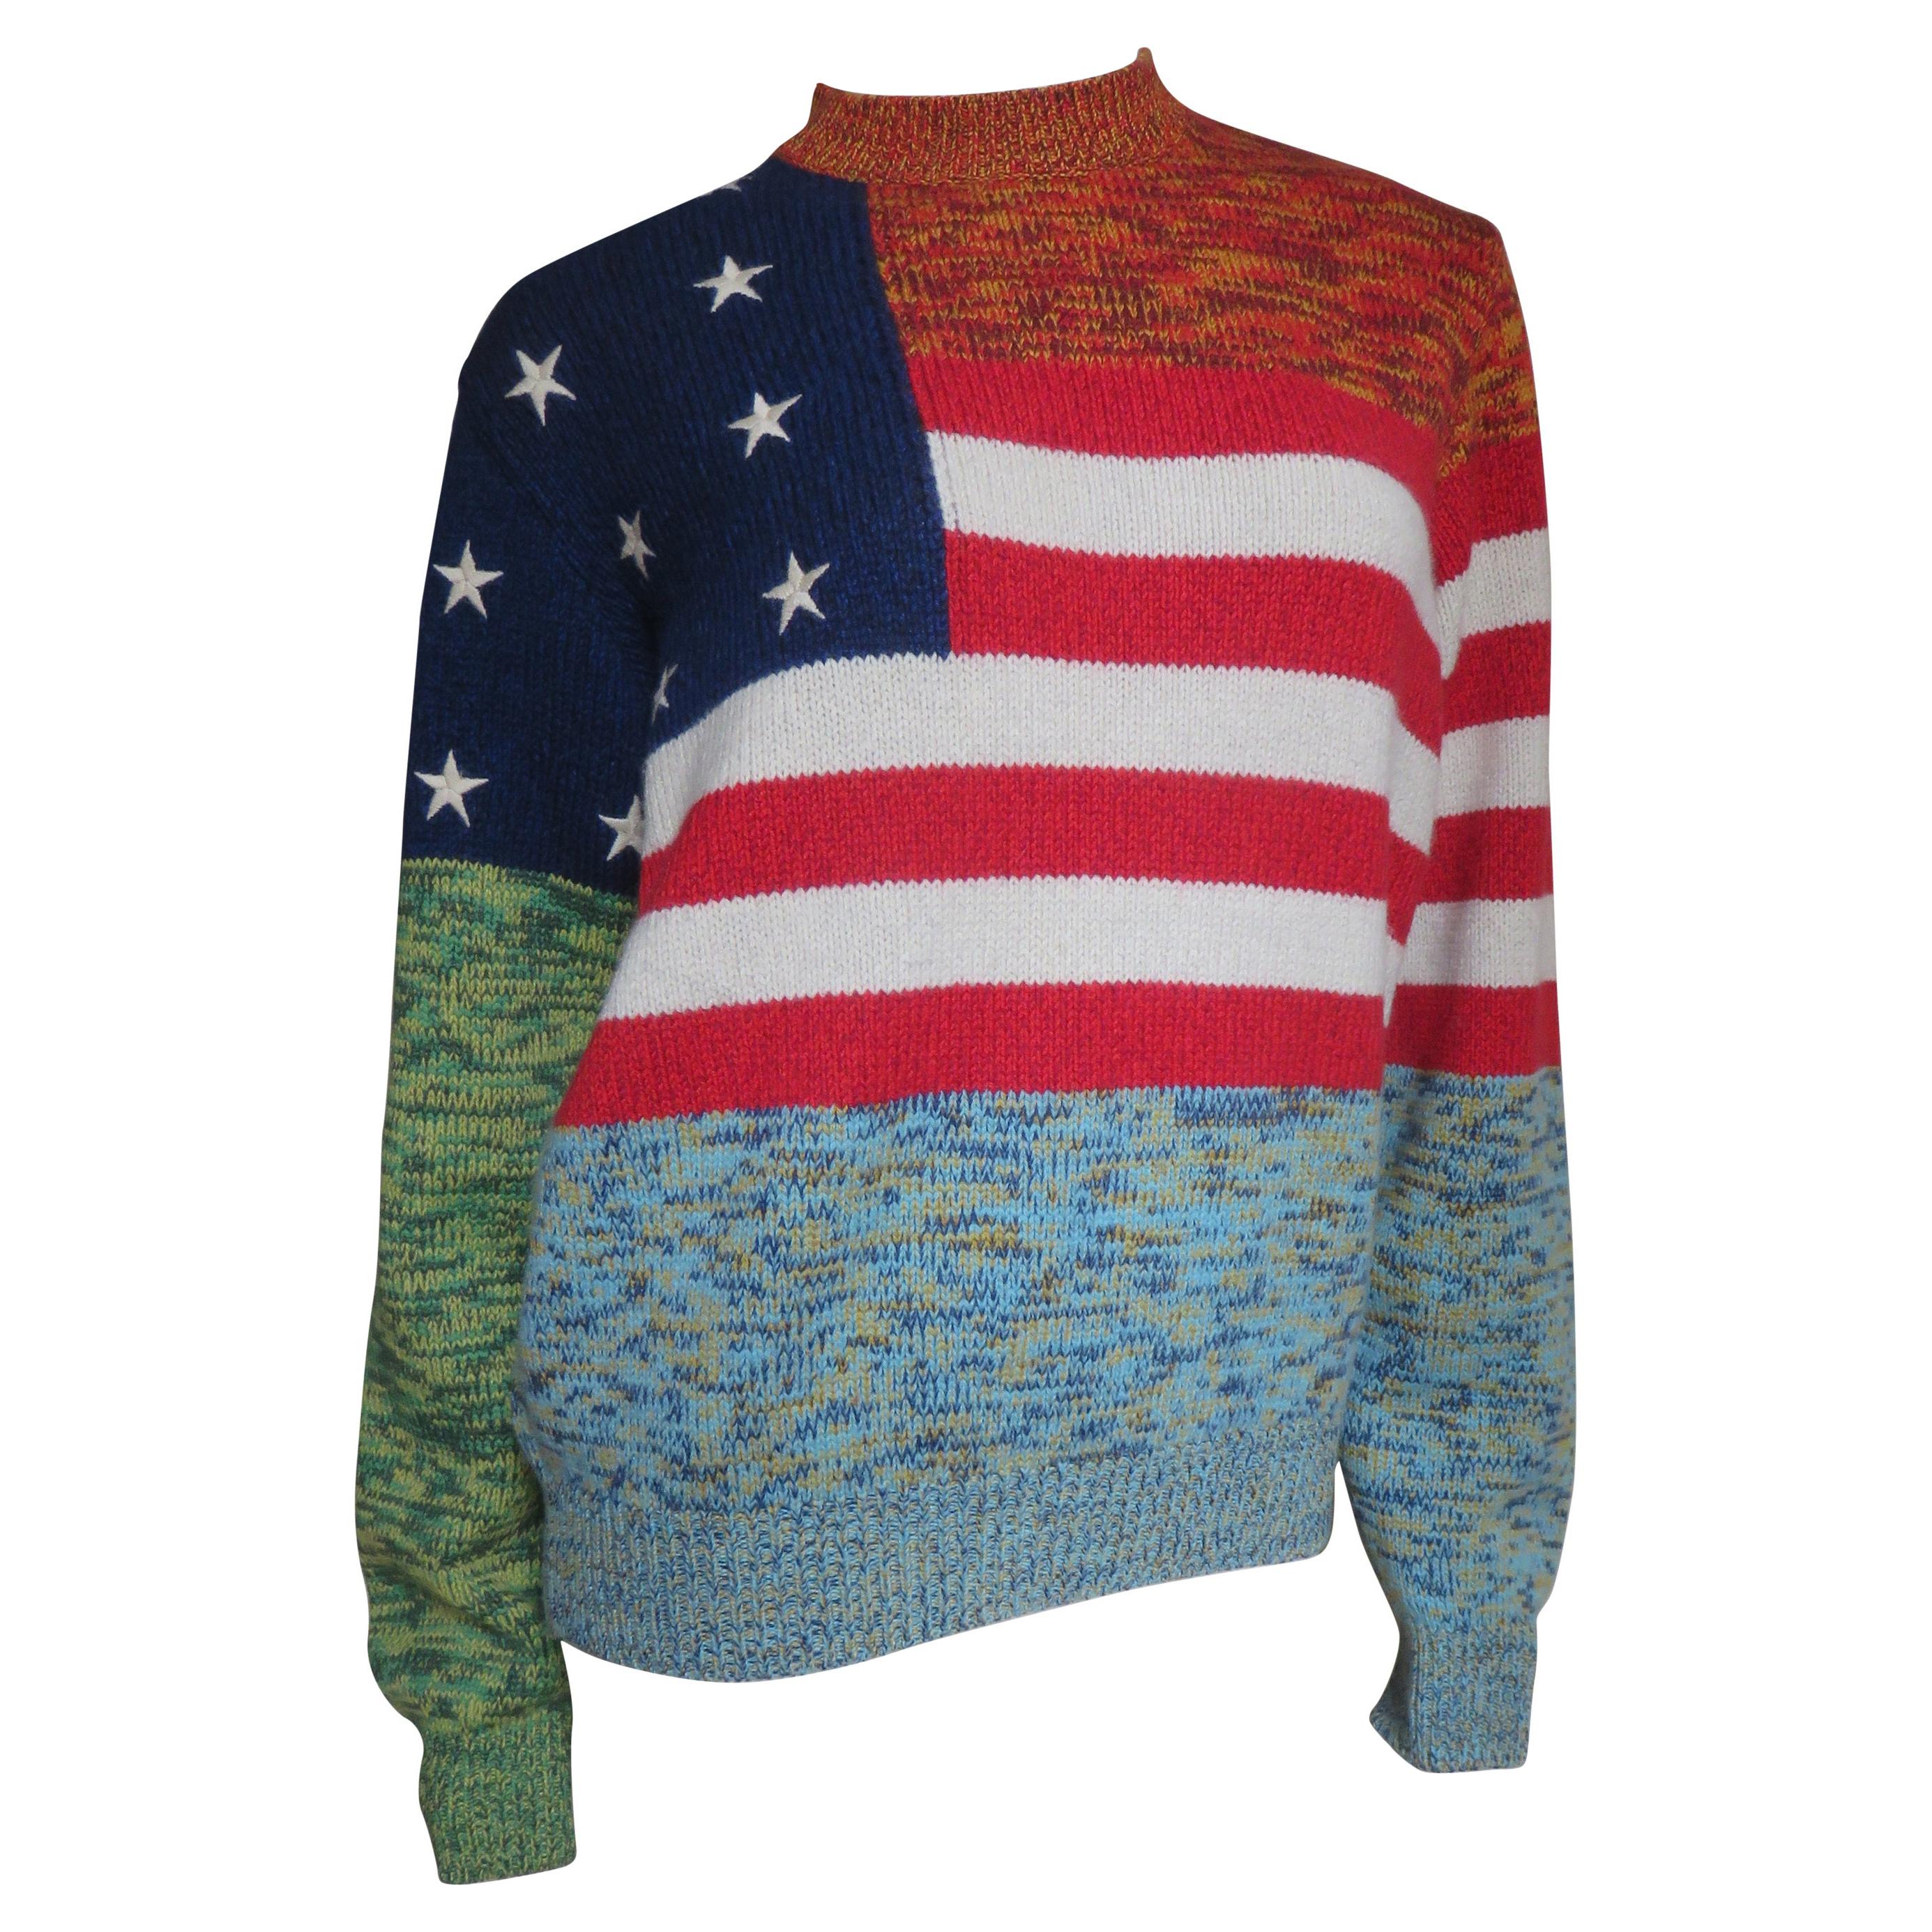 Gianni Versace New Cashmere American Flag Sweater